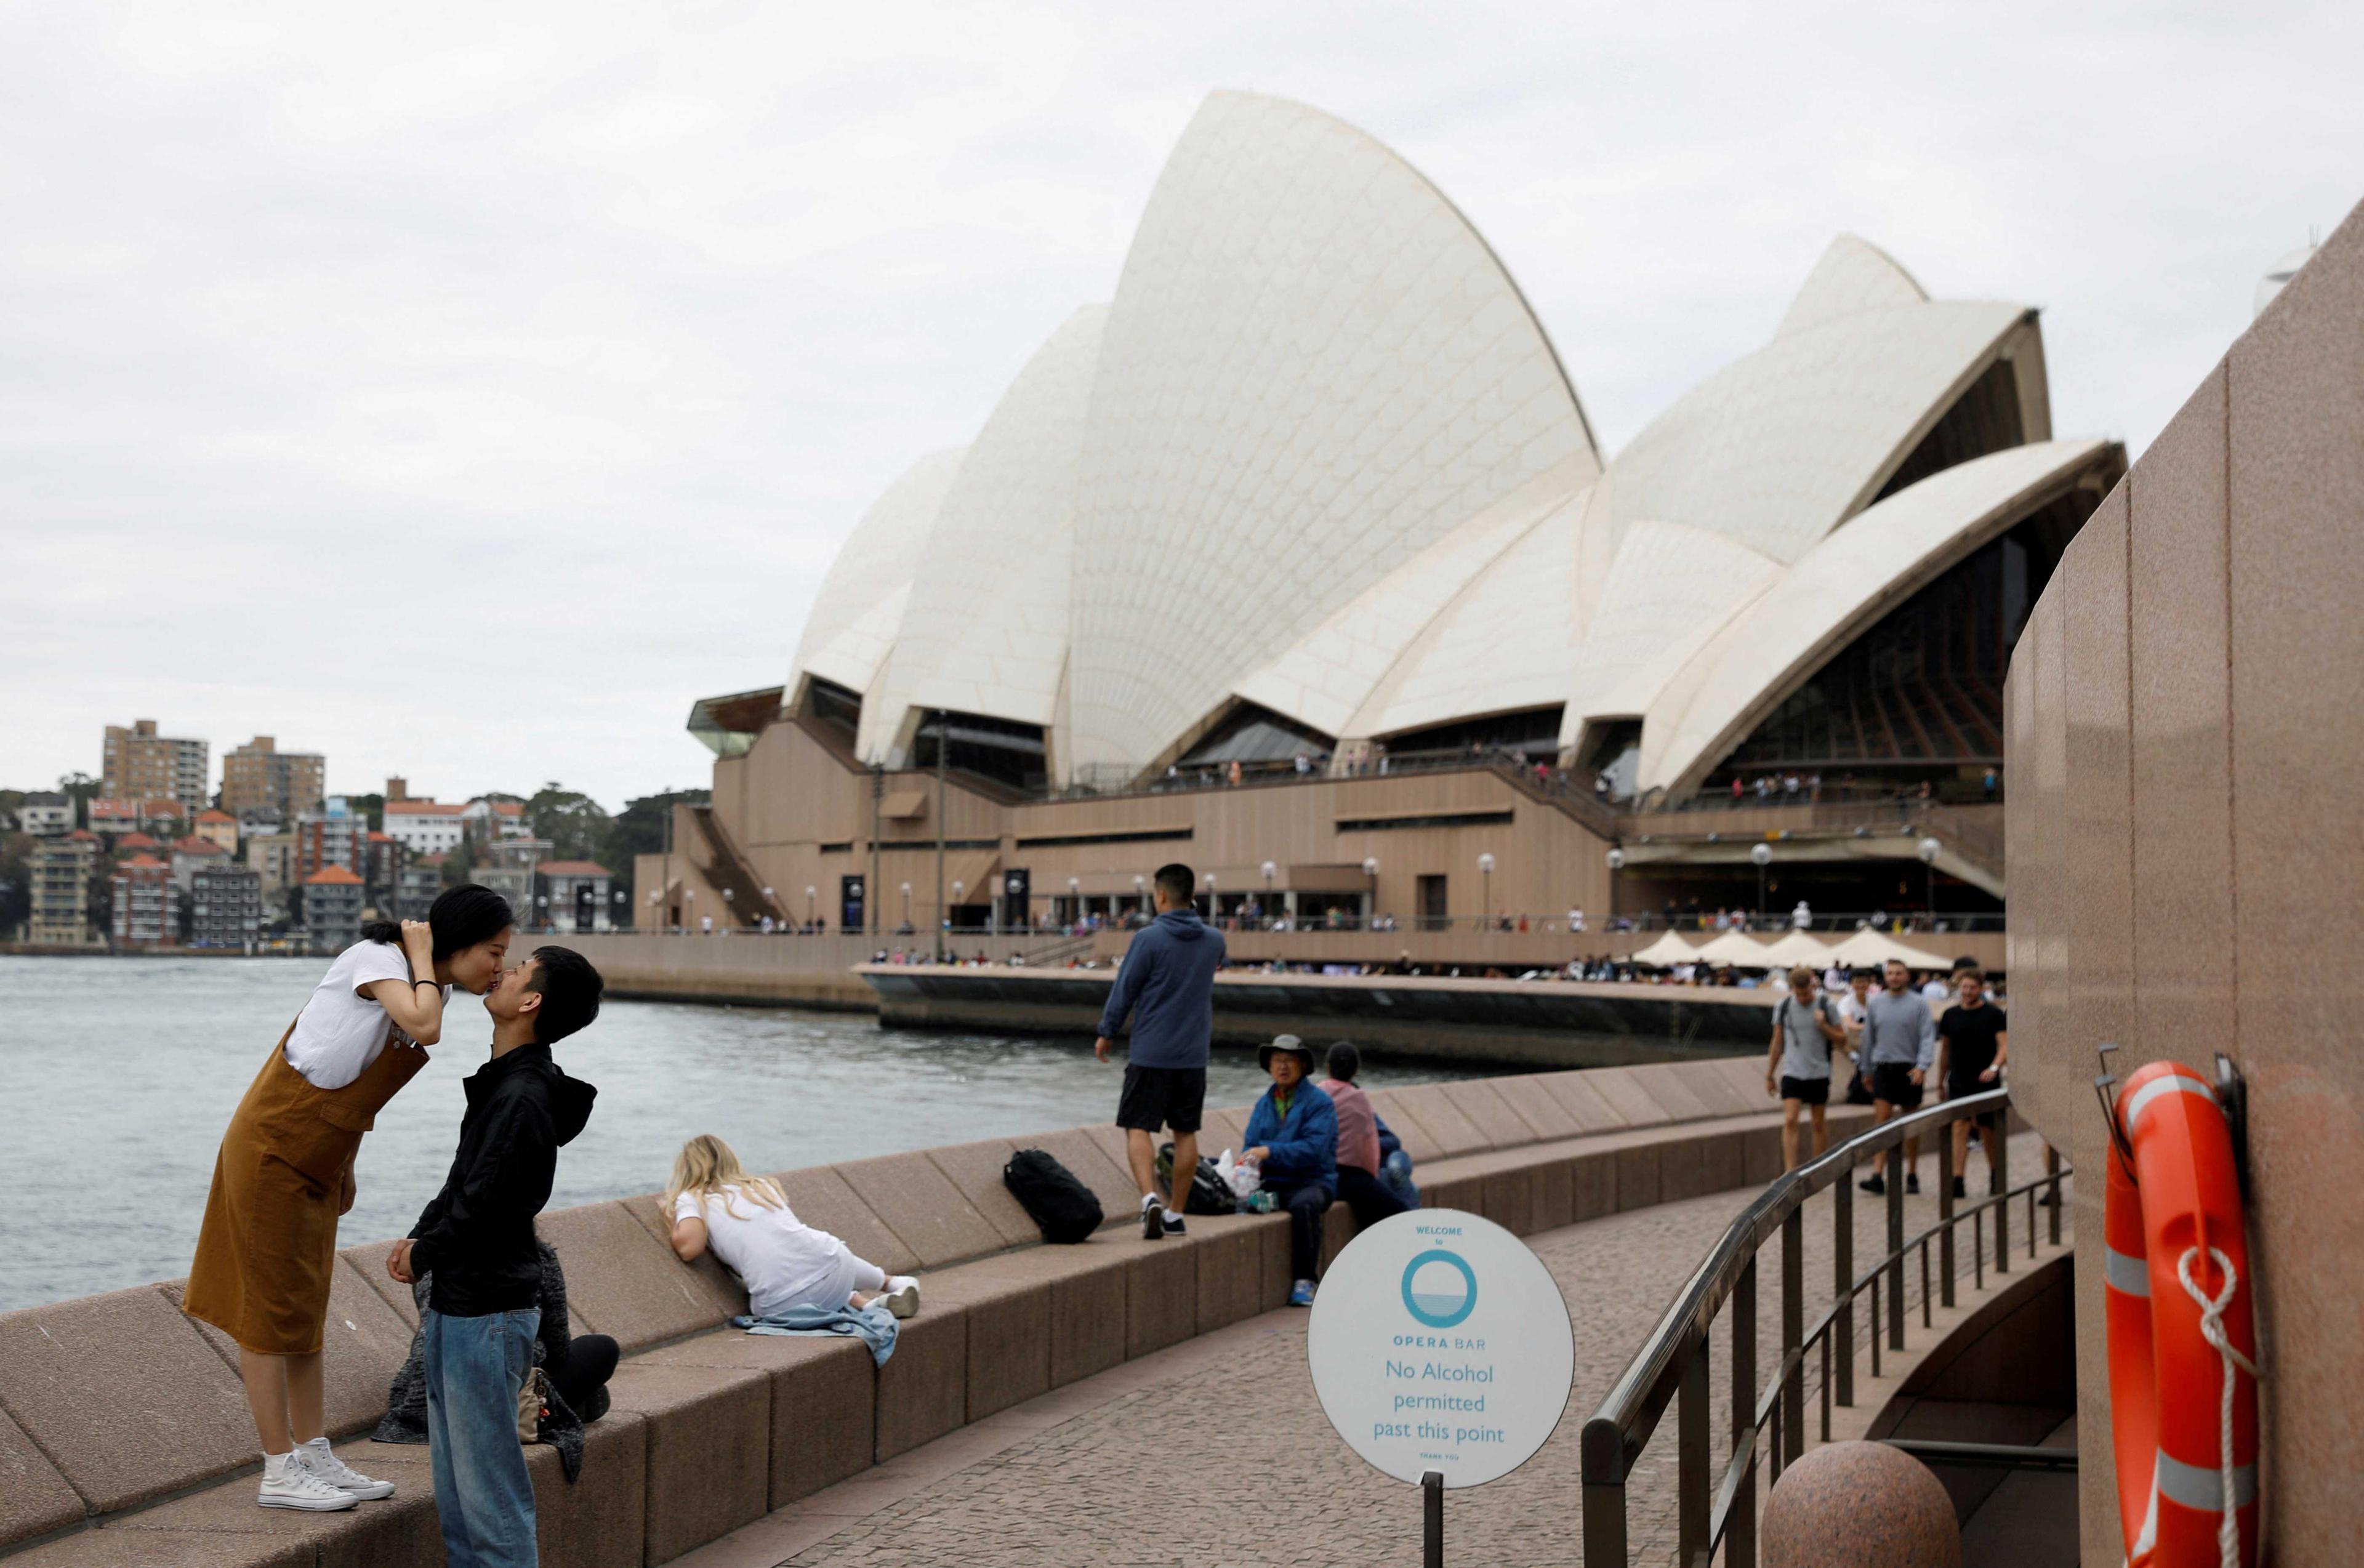 Chinese tourists pose for a photographer near the Sydney Opera House, Australia April 18, 2018. Photo: Reuters